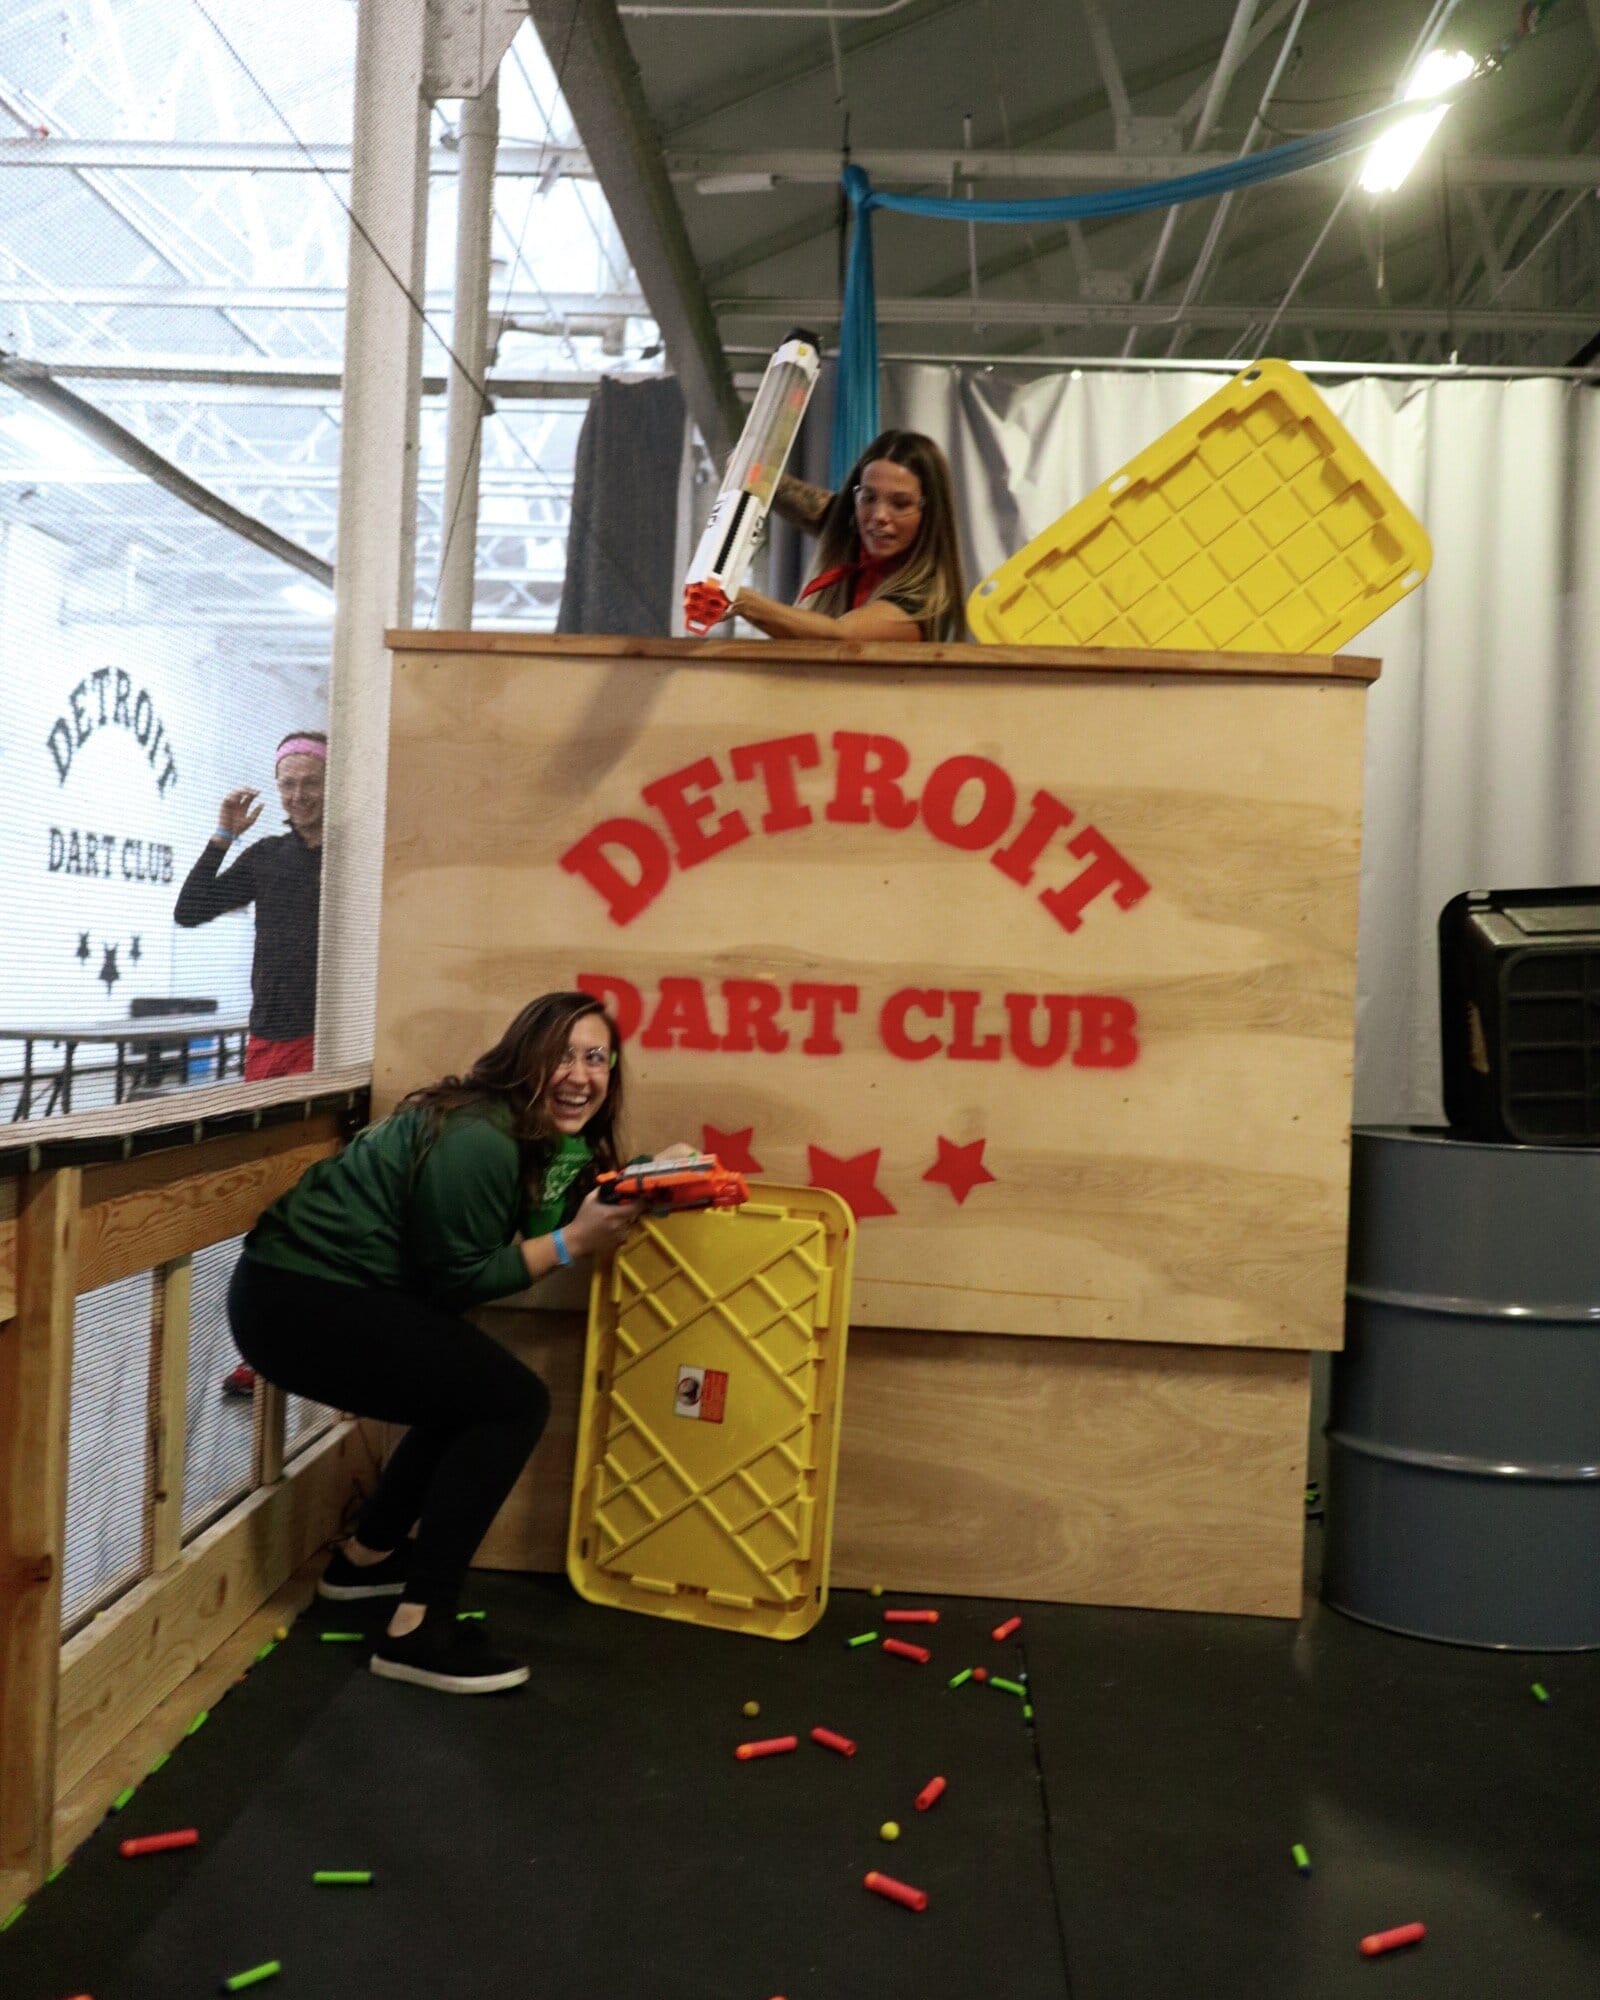 Things to do in Detroit Dart Club